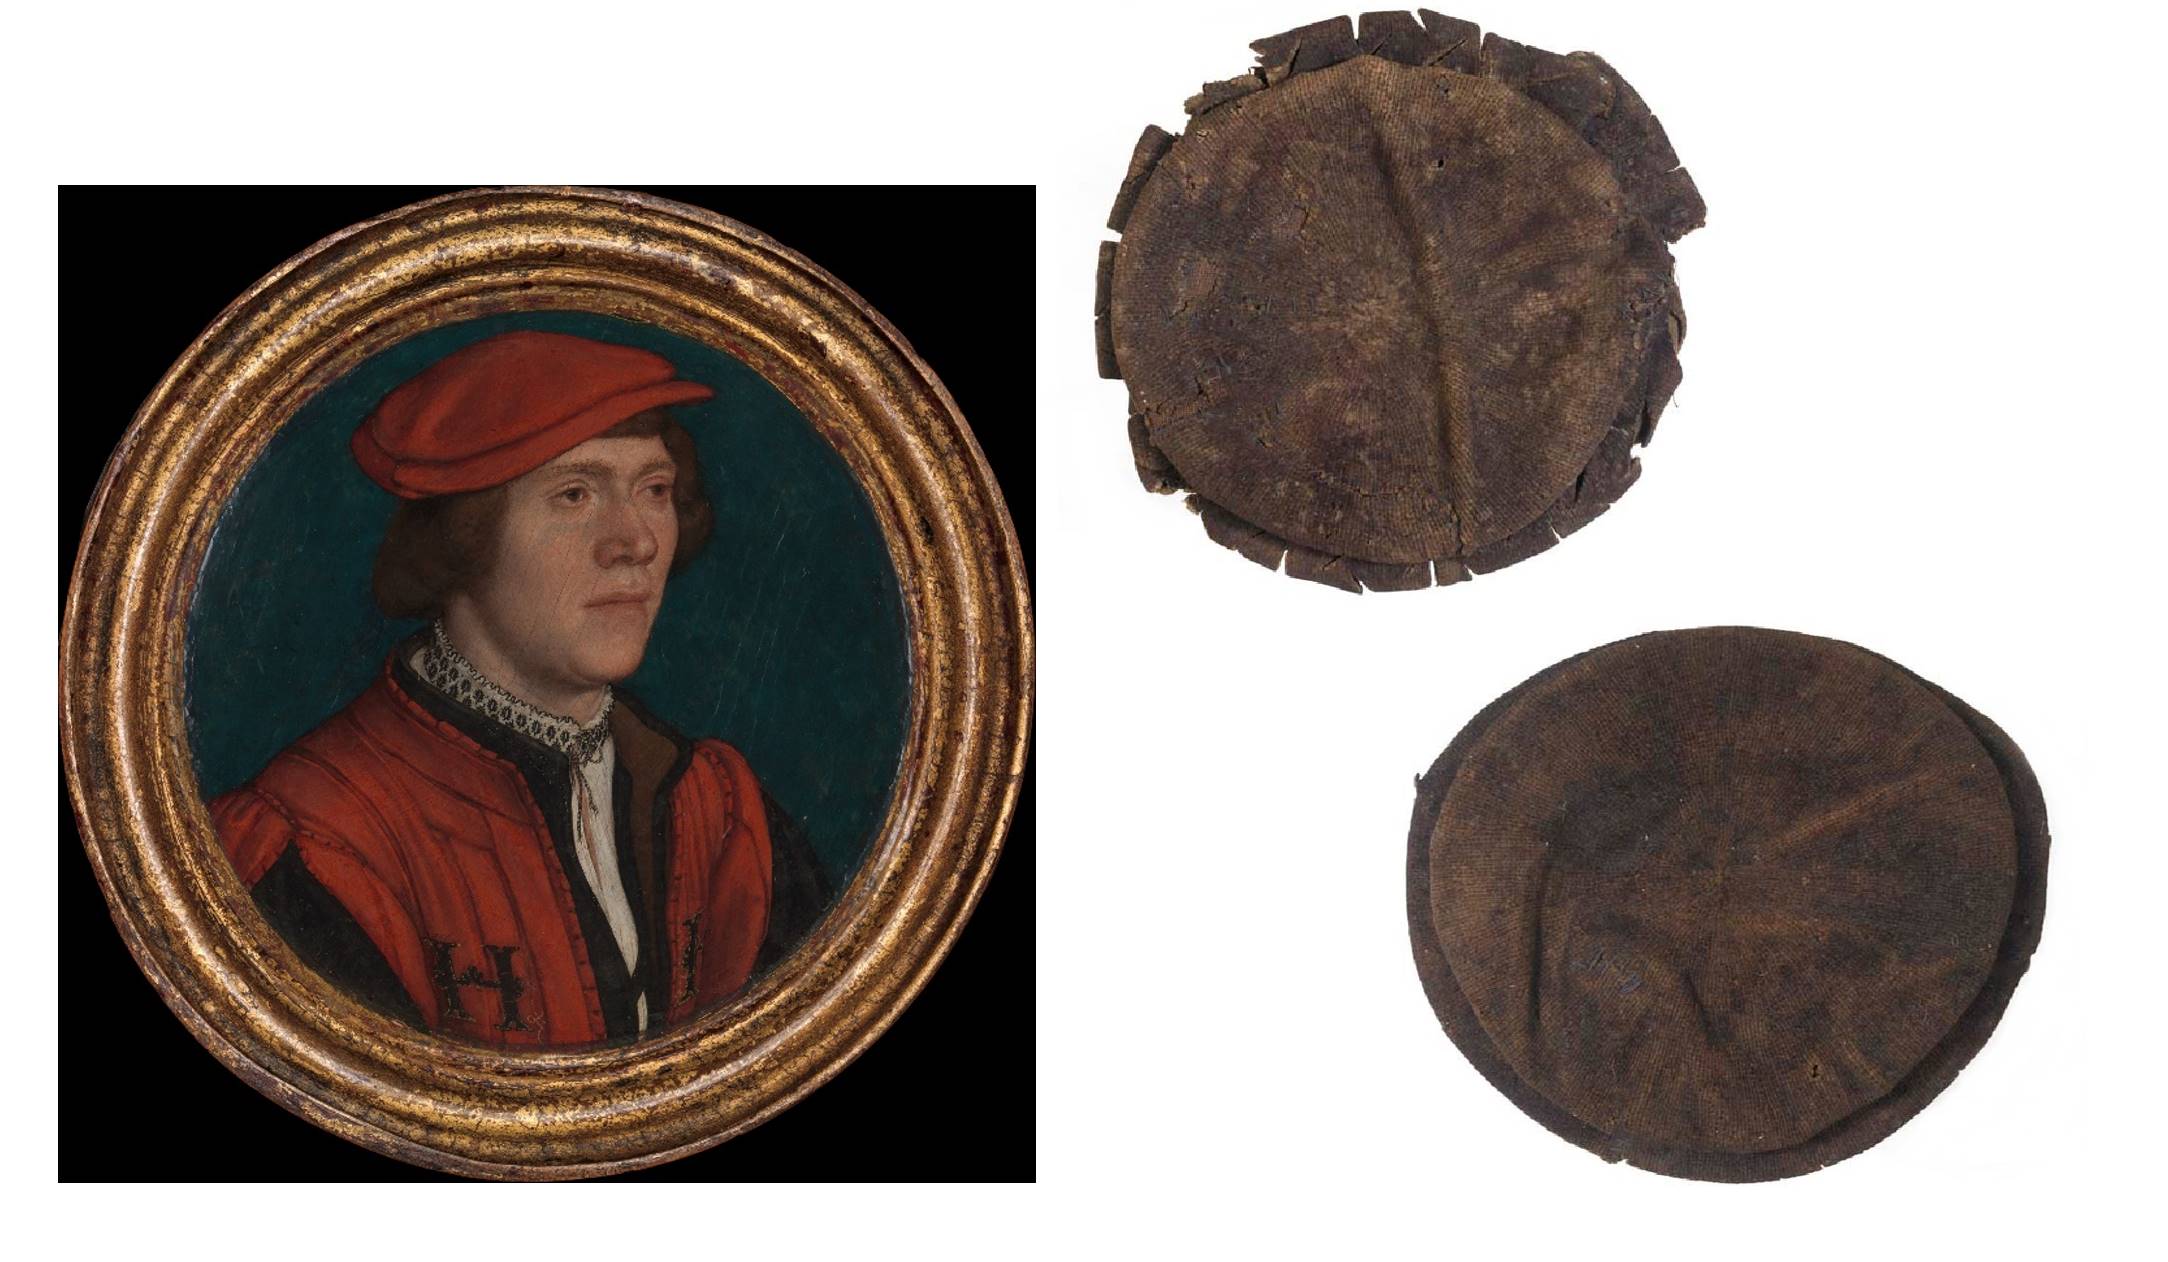 Woollen caps like the two on the left (ID nos: A6340, A6345) would have been worn by men as depicted in this ‘Portrait of a Man in a Red Cap’, 1532–35, by Hans Holbein the Younger. (Courtesy: The Metropolitan Museum of Art/Public domain)